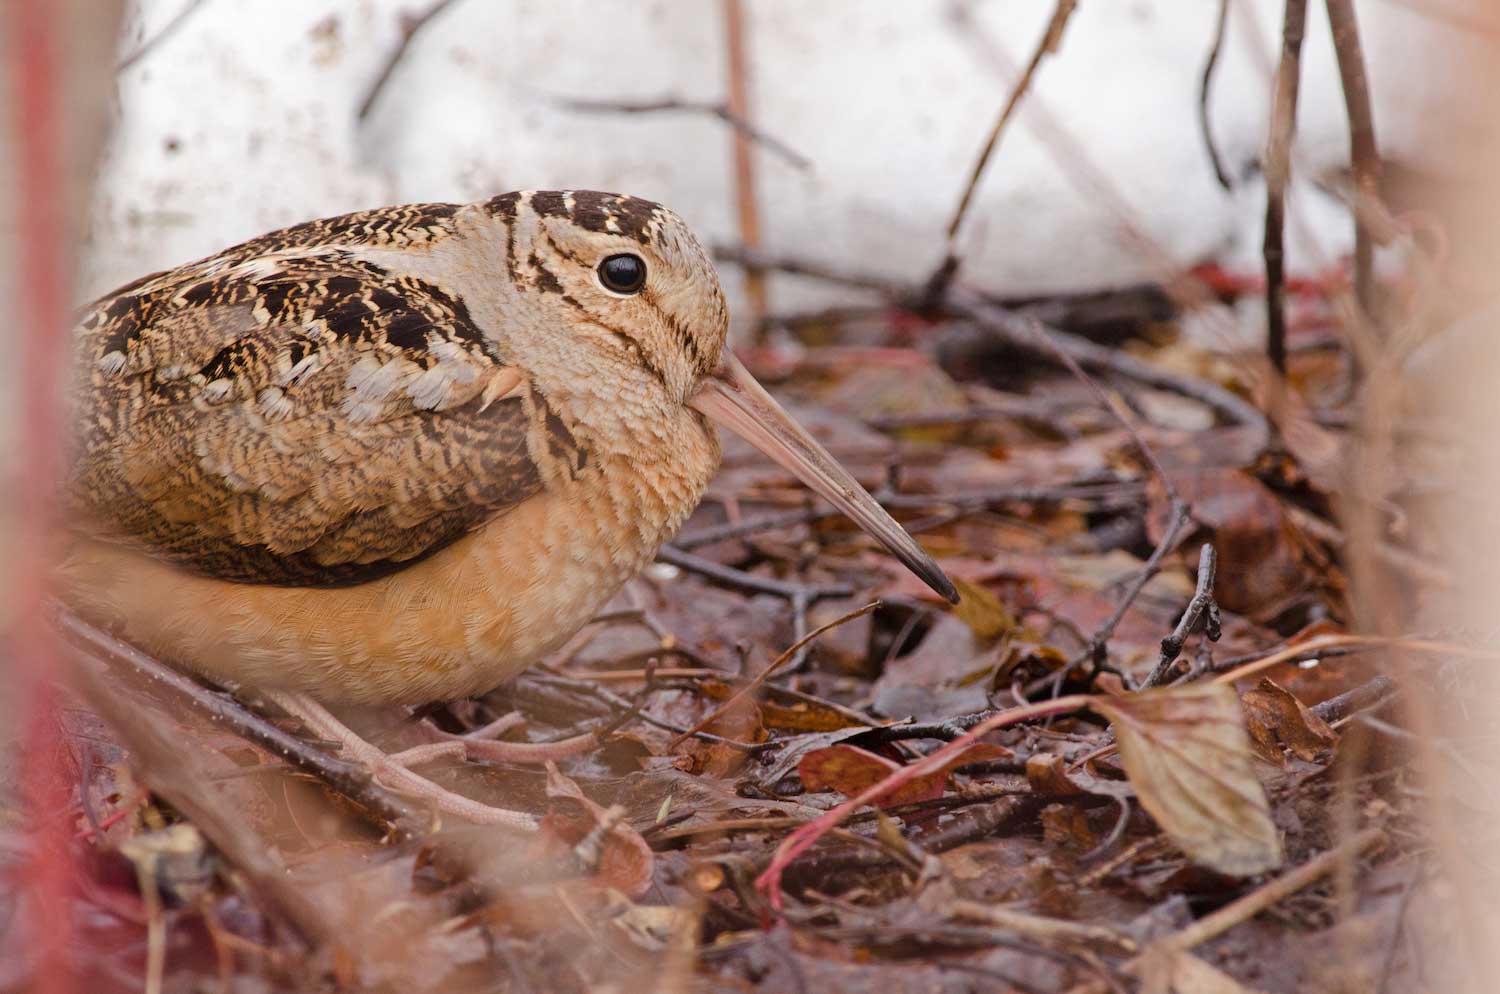 A woodcock on the ground.